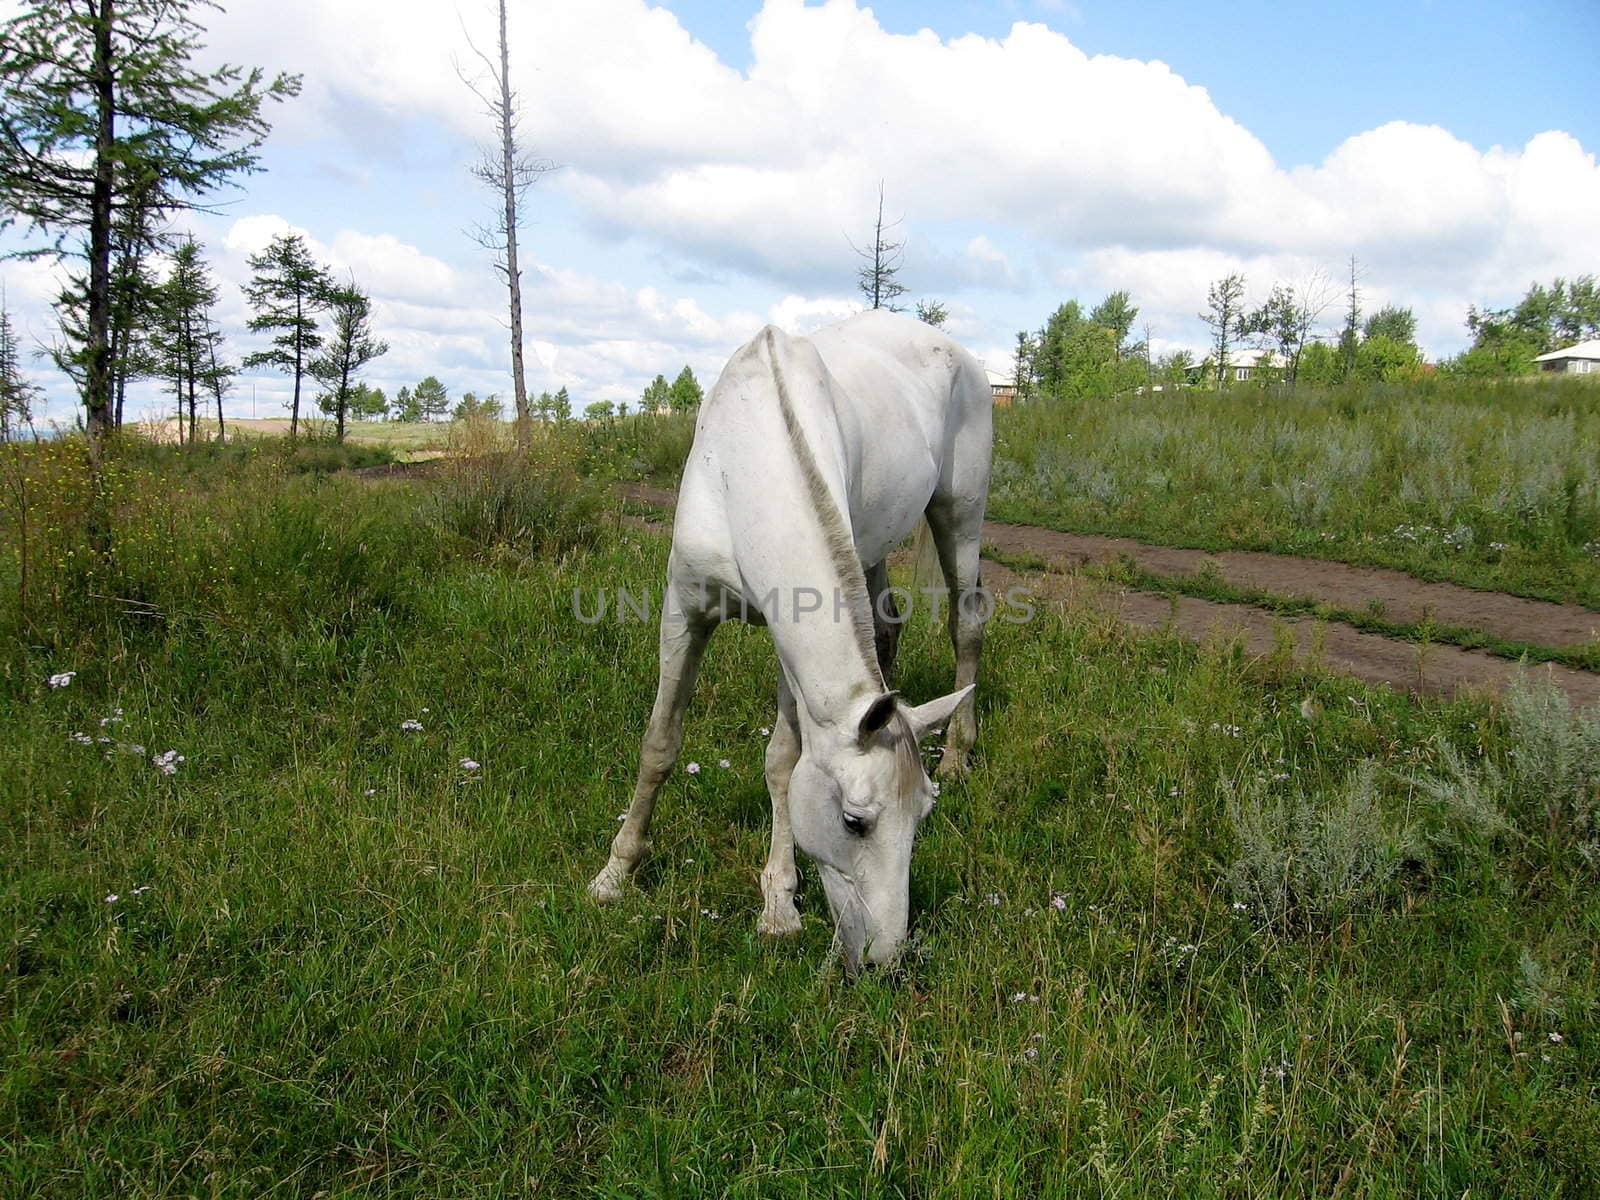 White horse on field eats grass in rural place